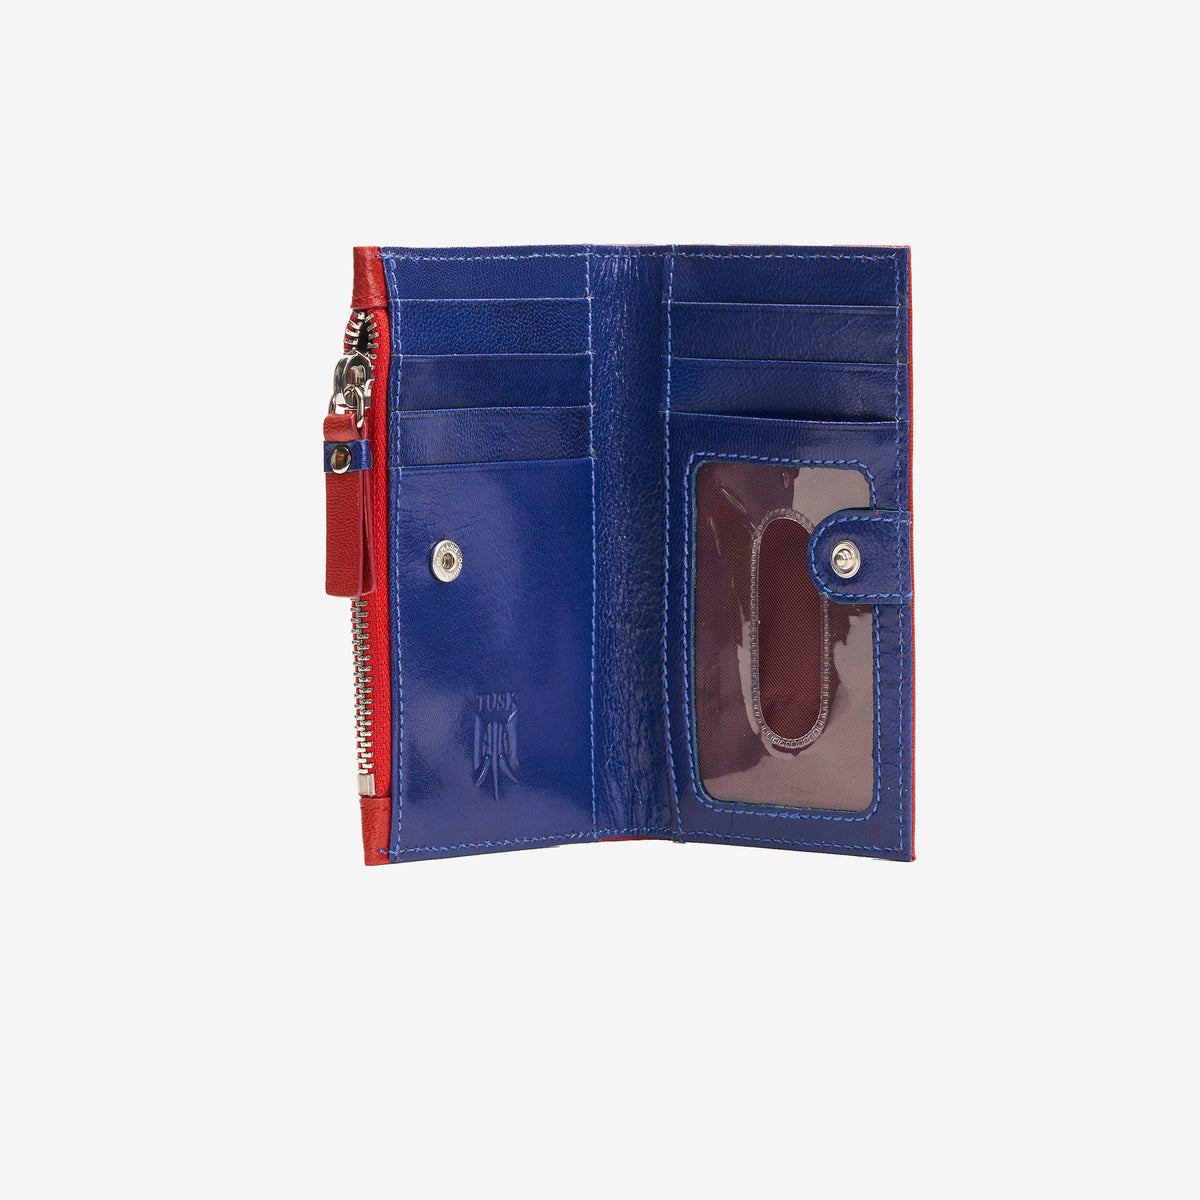     tusk-383-leather-slim-card-case-with-zip-coin-pocket-red-and-marine-open